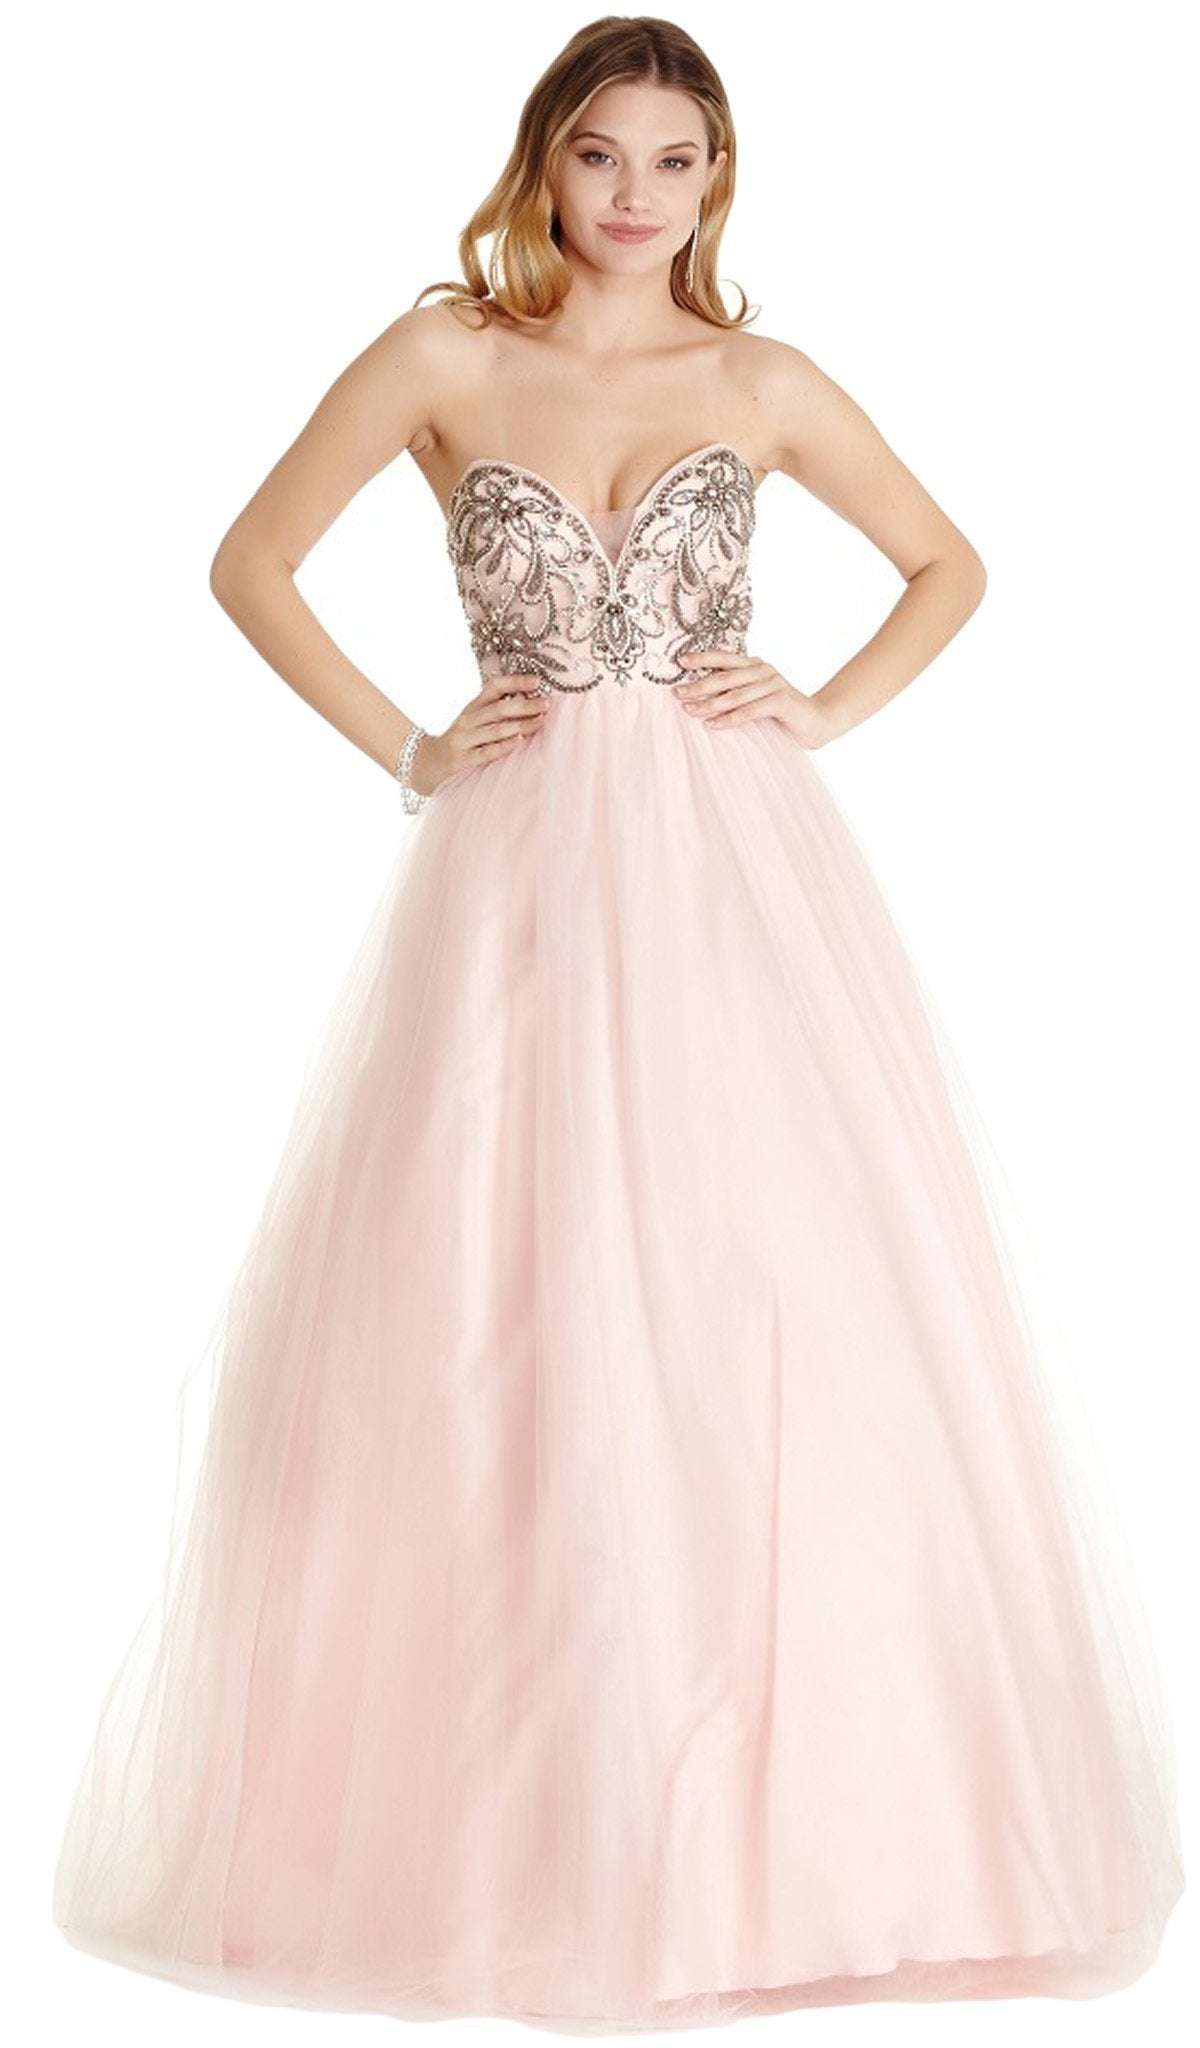 Image of Aspeed Design - Embellished Sweetheart Quinceanera